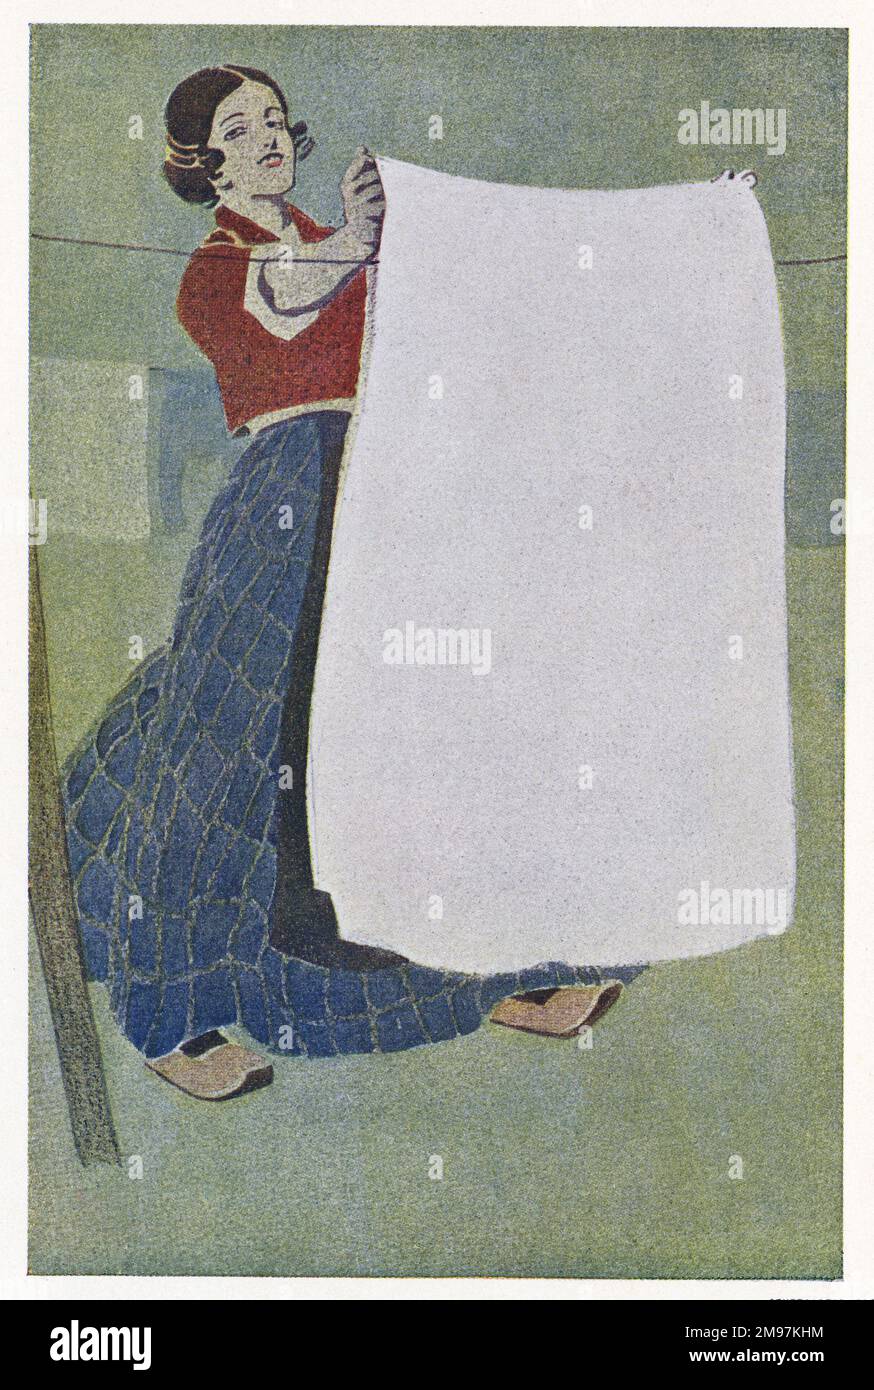 German poster design, a Dutch woman hanging out washing. Stock Photo